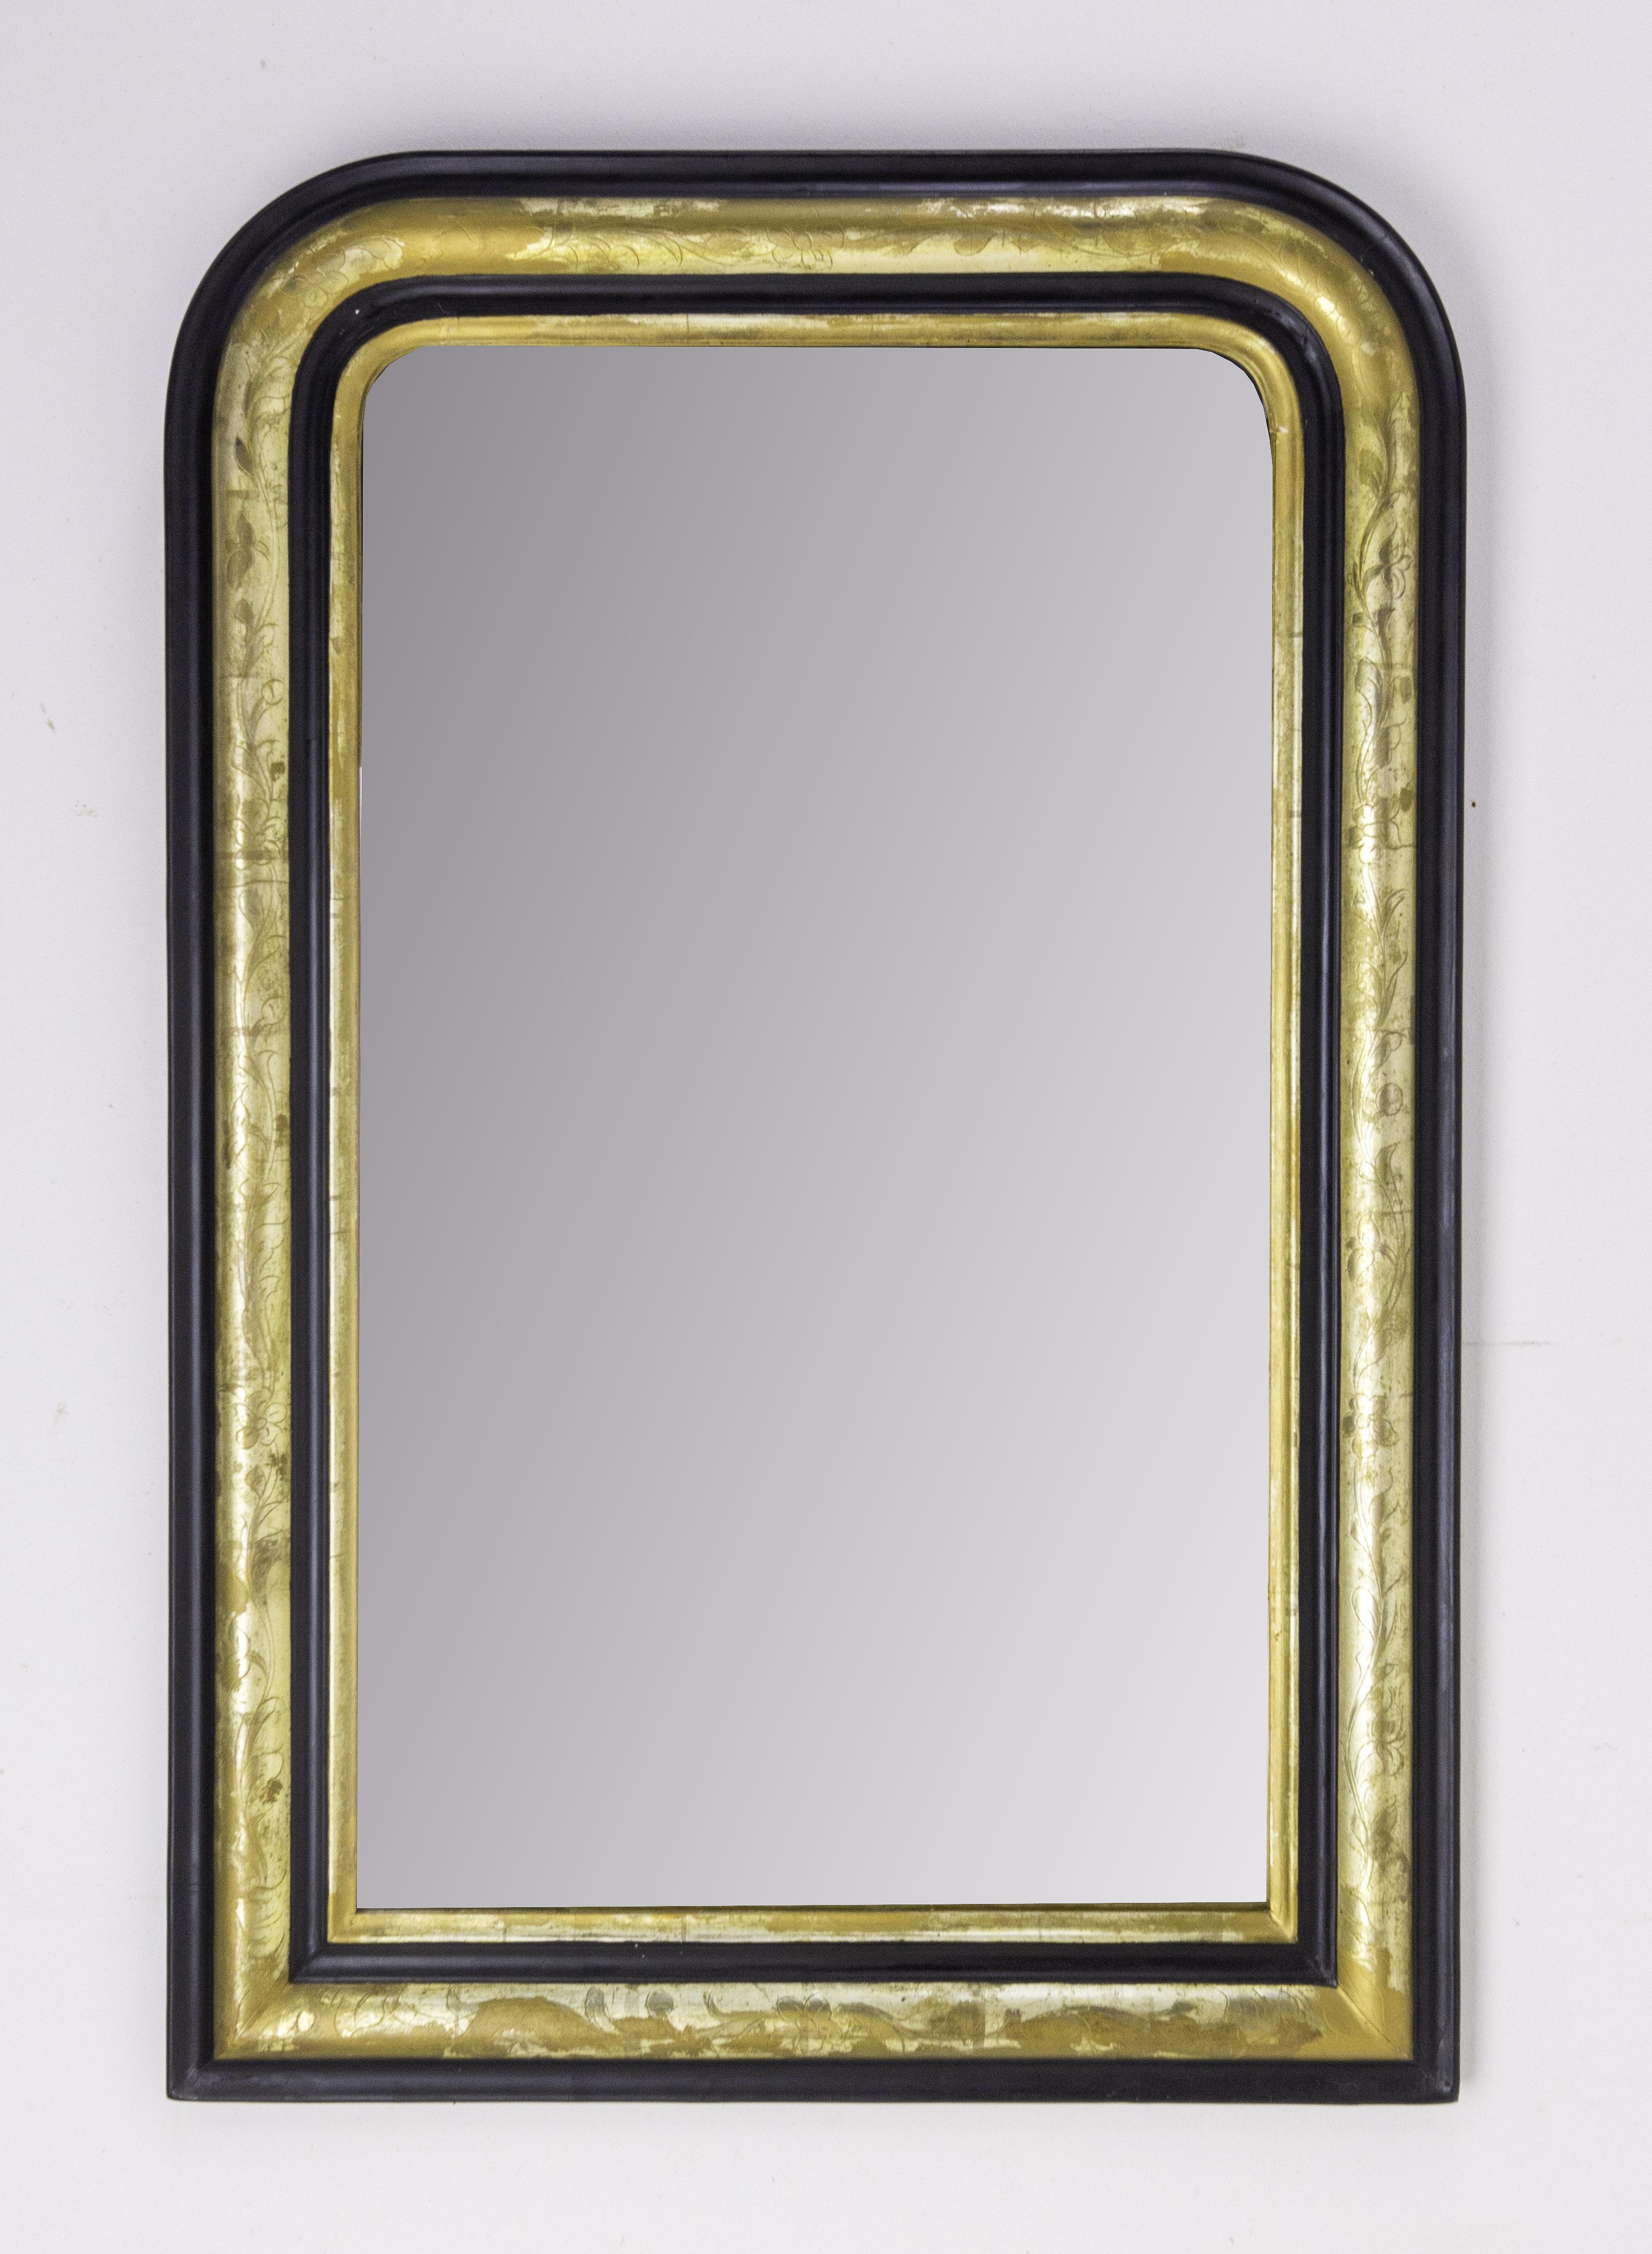 Napoléon III Stucco mirror,
Ebony imitation and gilt.
The mirror has been changed.
Good antique condition.

Shipping:
L 65,5 P 4 H 99 9,5 KG.